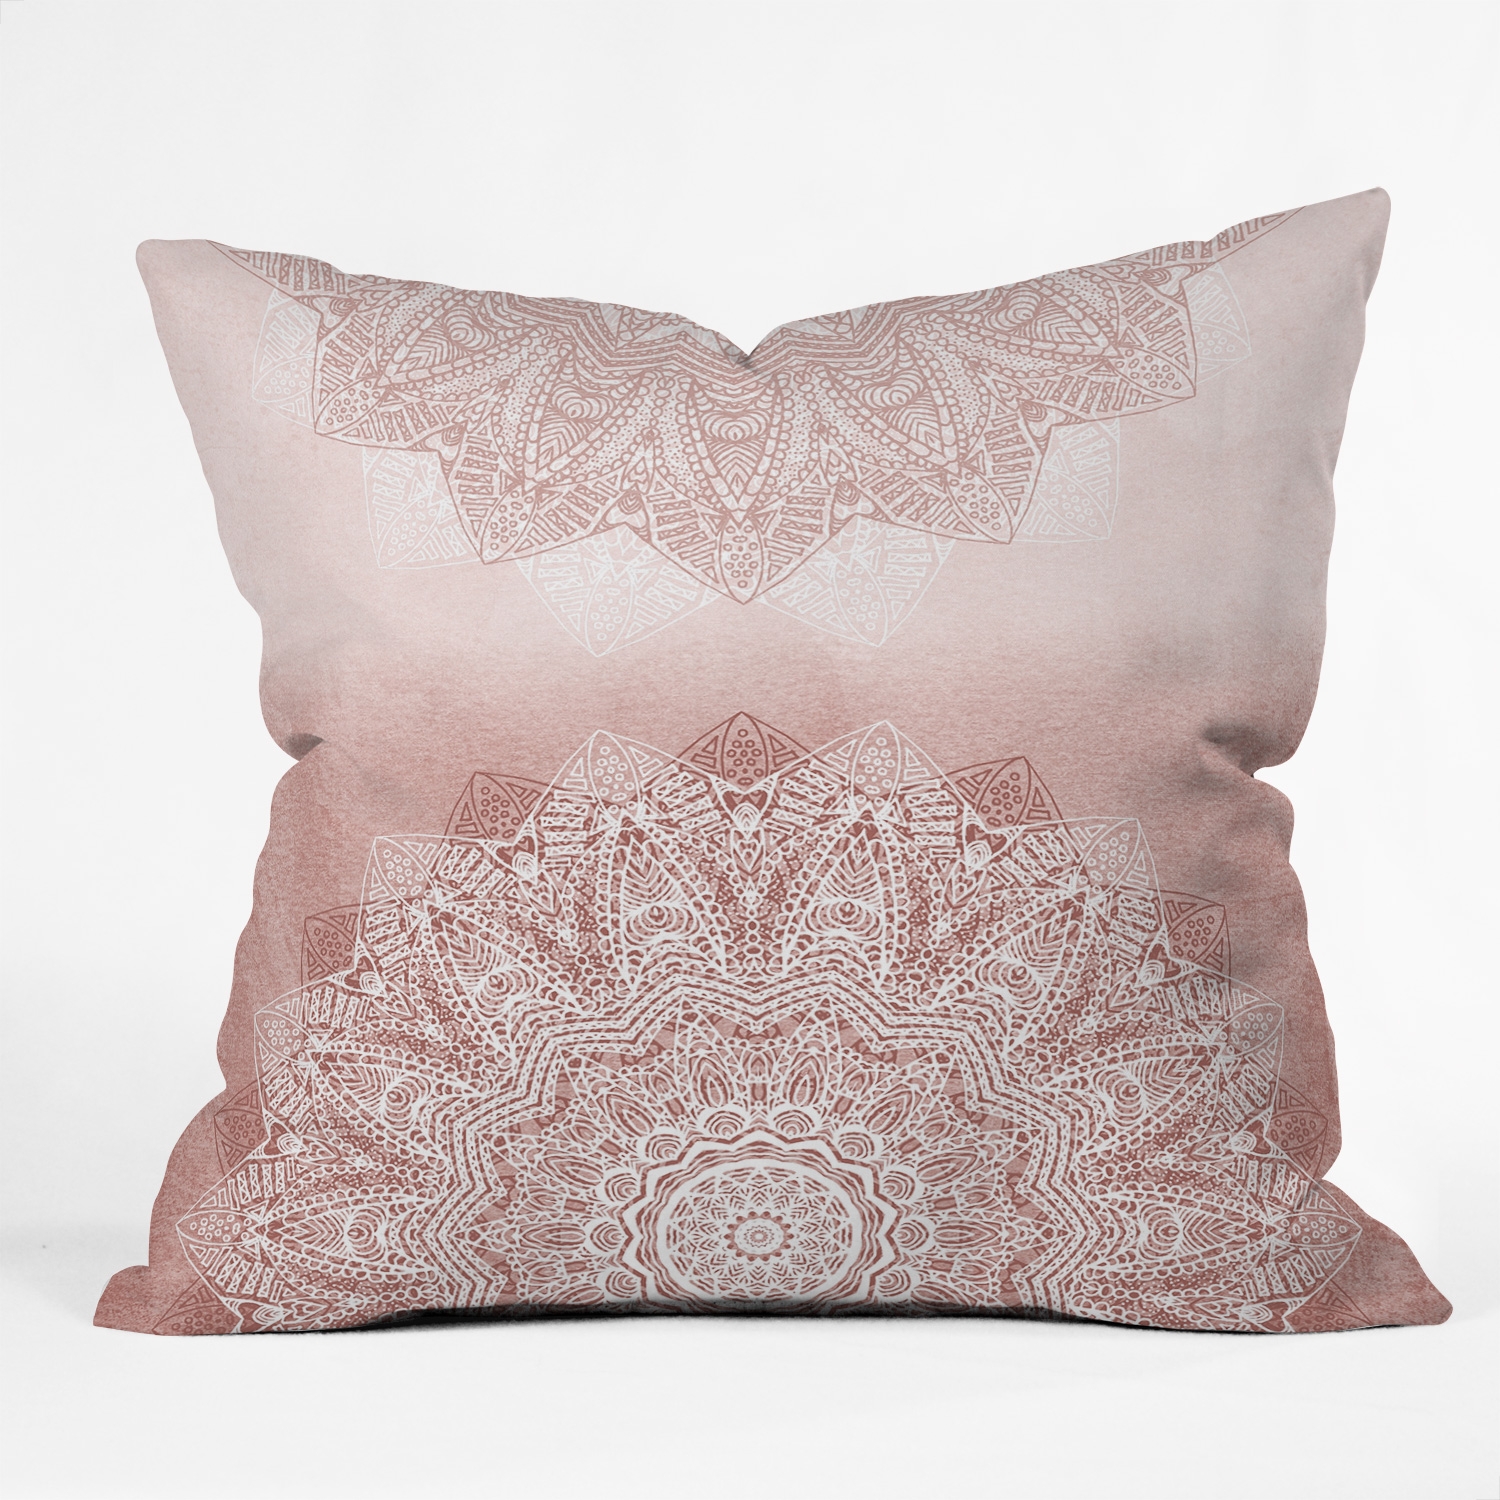 There Goes The Fear Rose Blush by Monika Strigel - Outdoor Throw Pillow 16" x 16" - Image 1